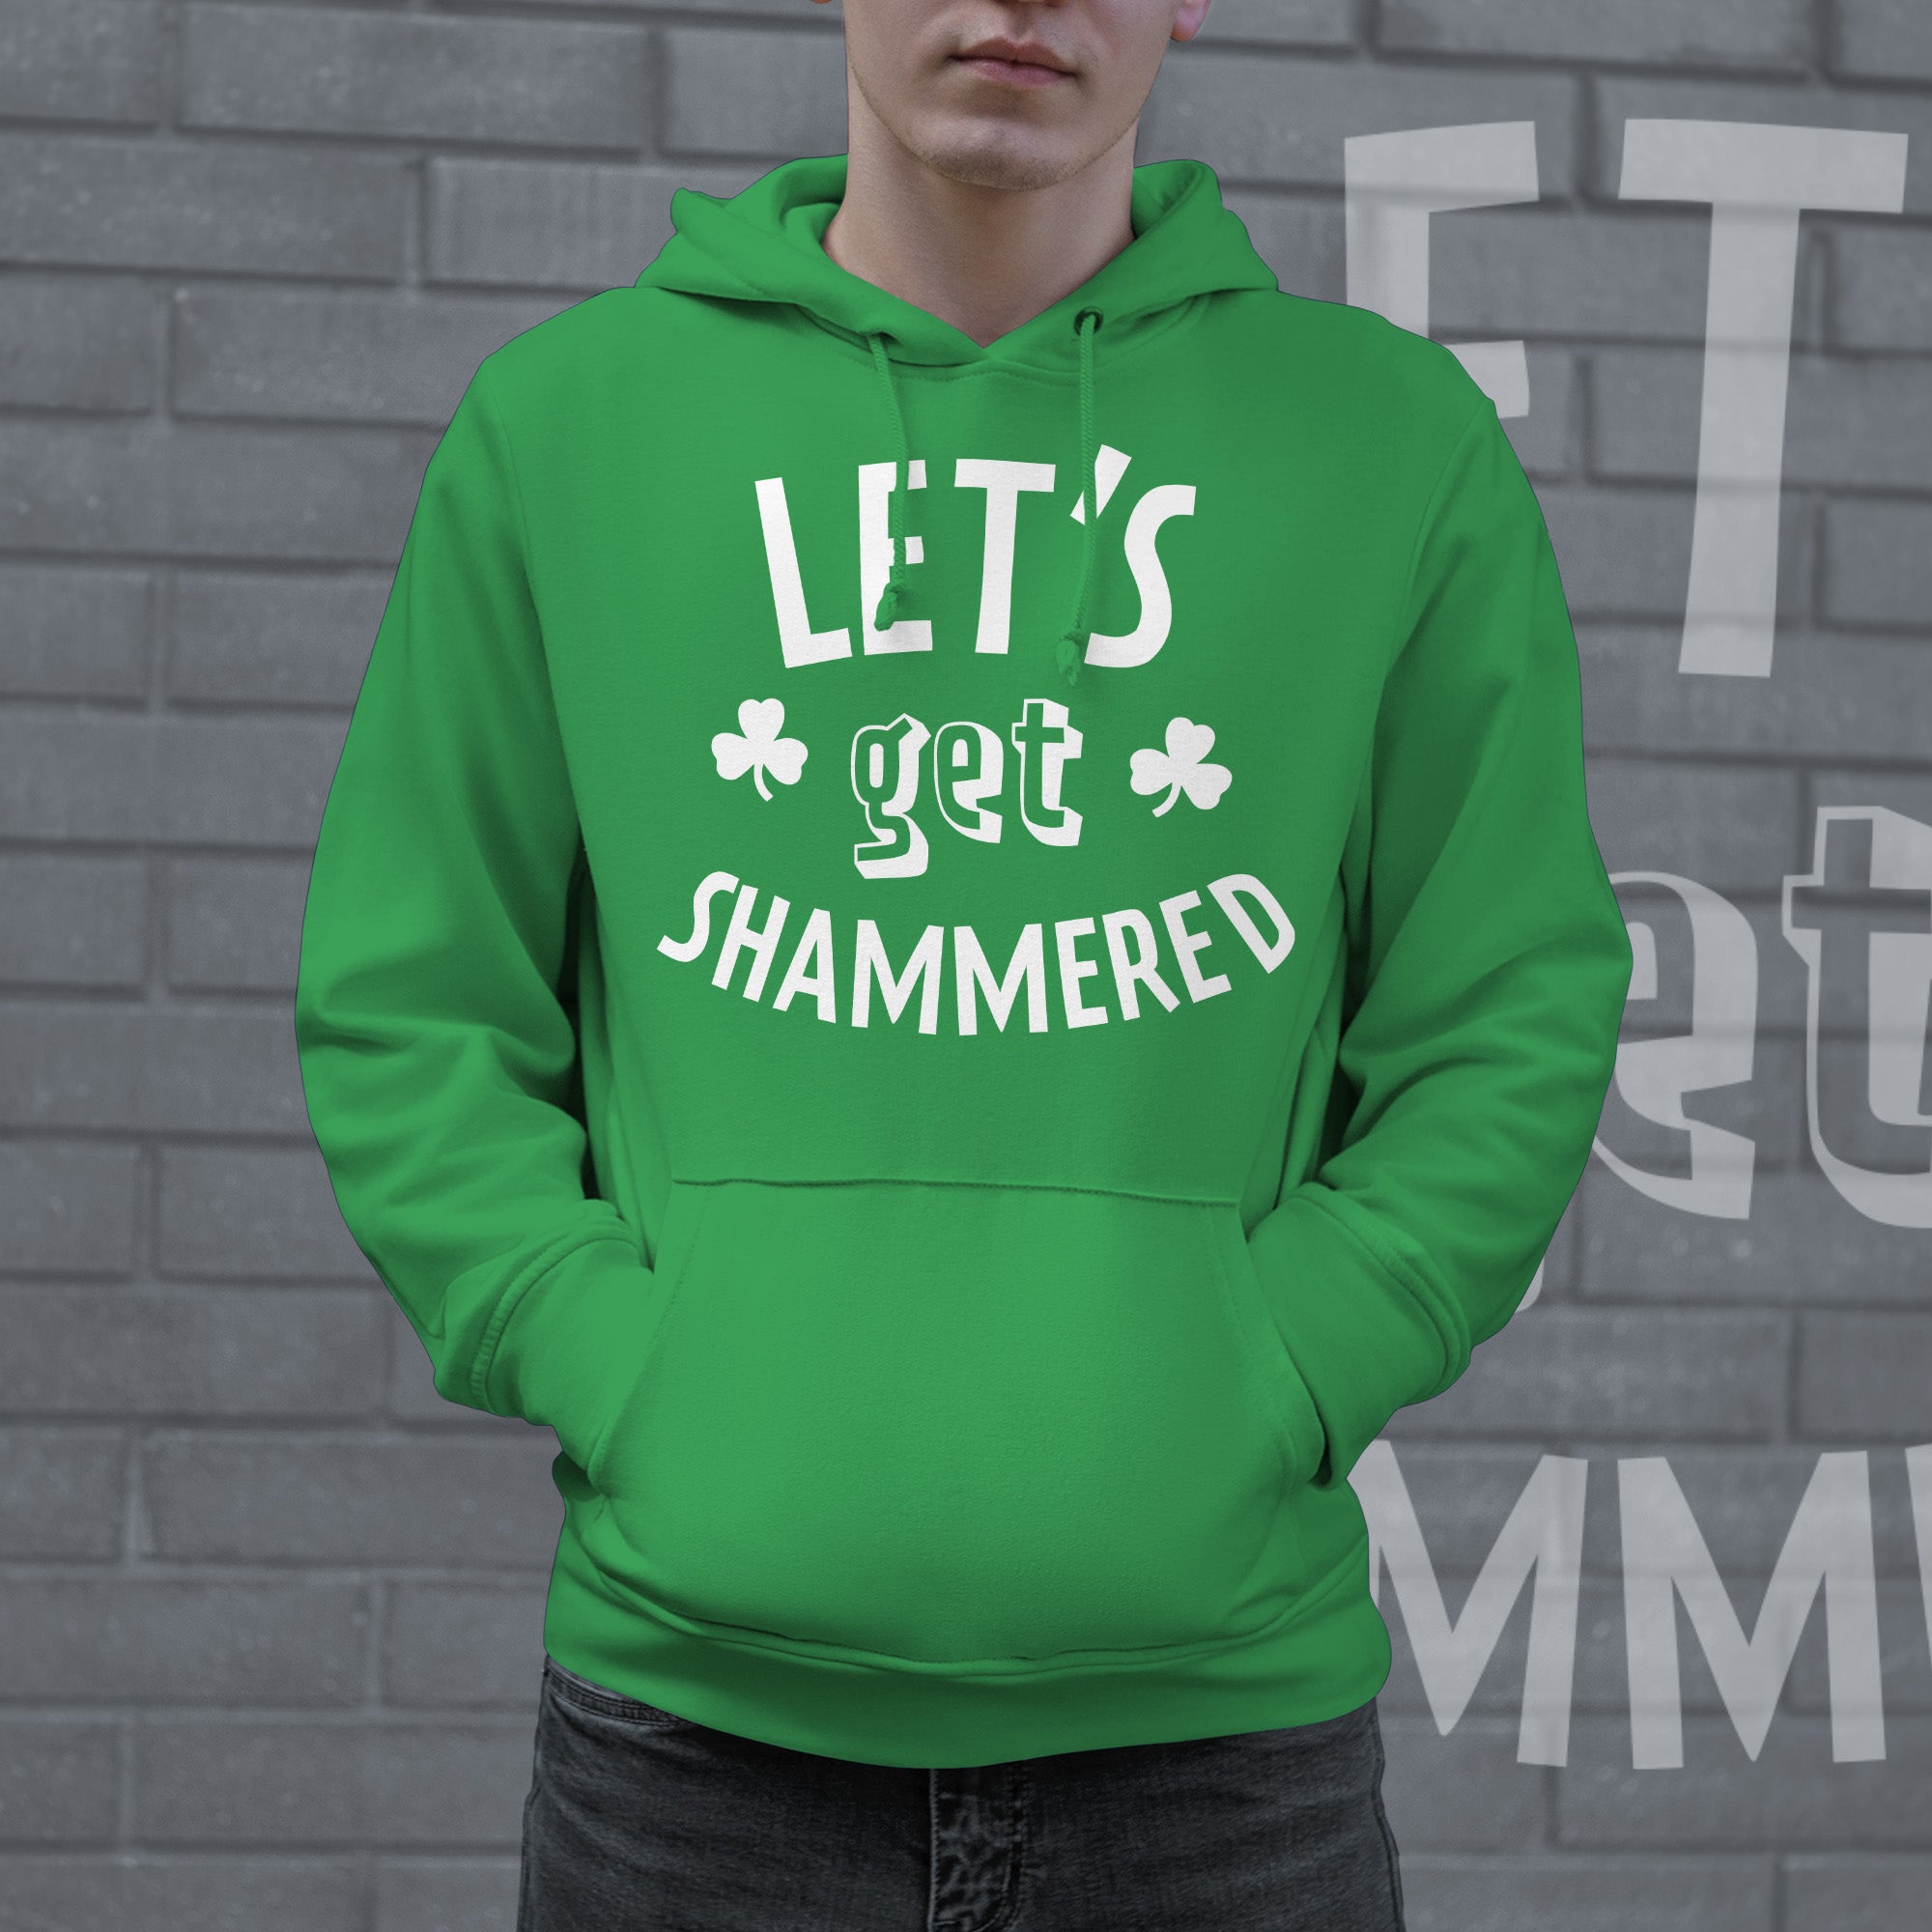 Funny Green Lets Get Shammered Hoodie Nerdy Saint Patrick's Day Drinking Tee